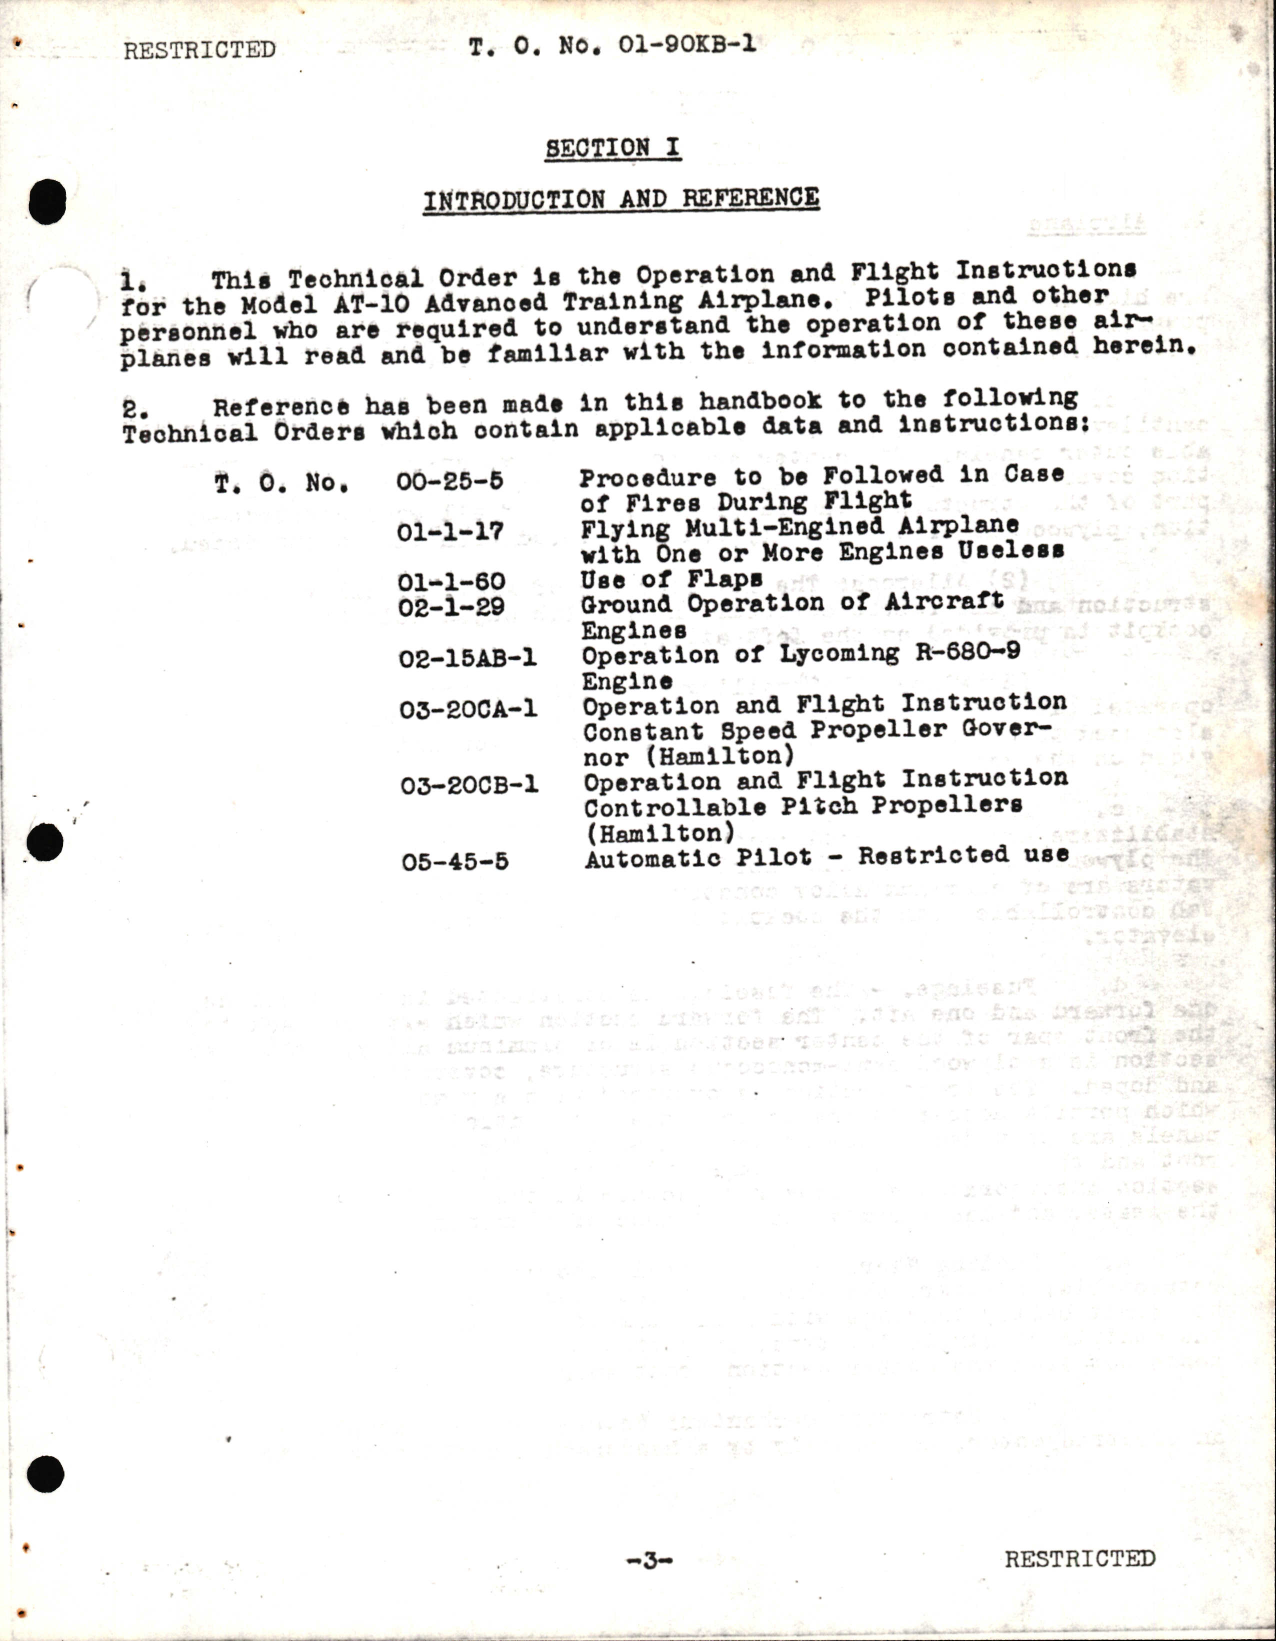 Sample page 5 from AirCorps Library document: Pilot's Flight Operating Instructions for AT-10 